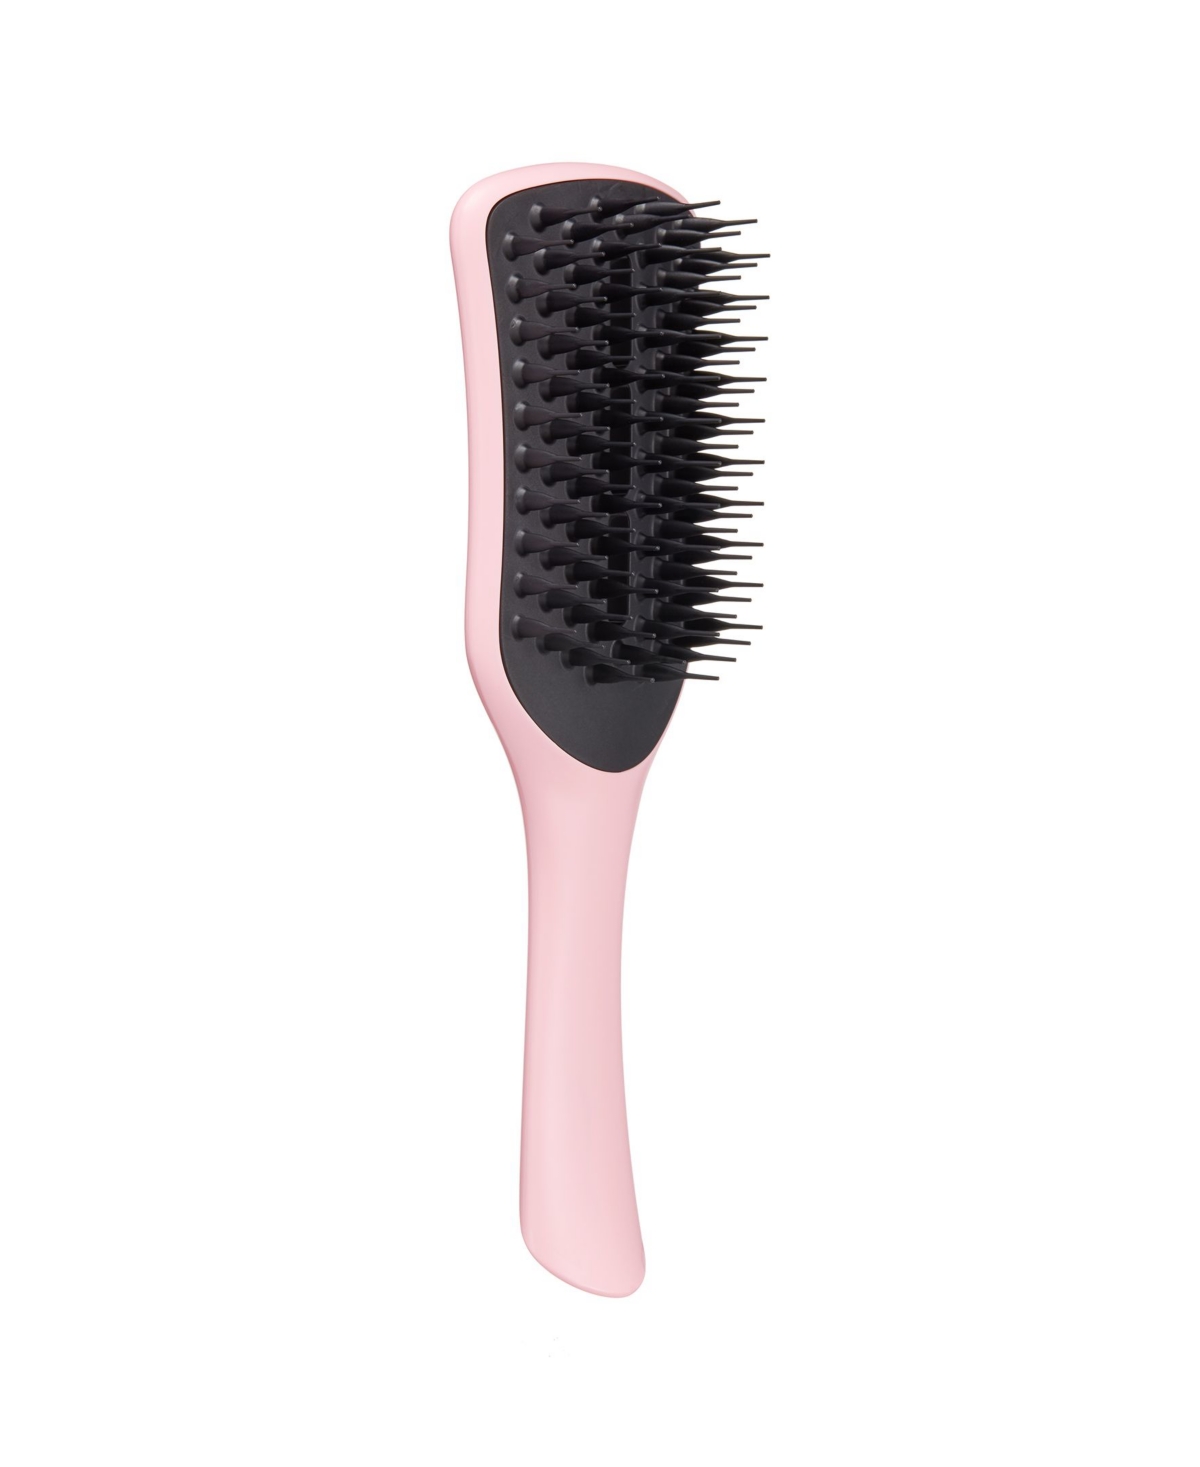 The Ultimate Vented Hairbrush - Tickled Pink